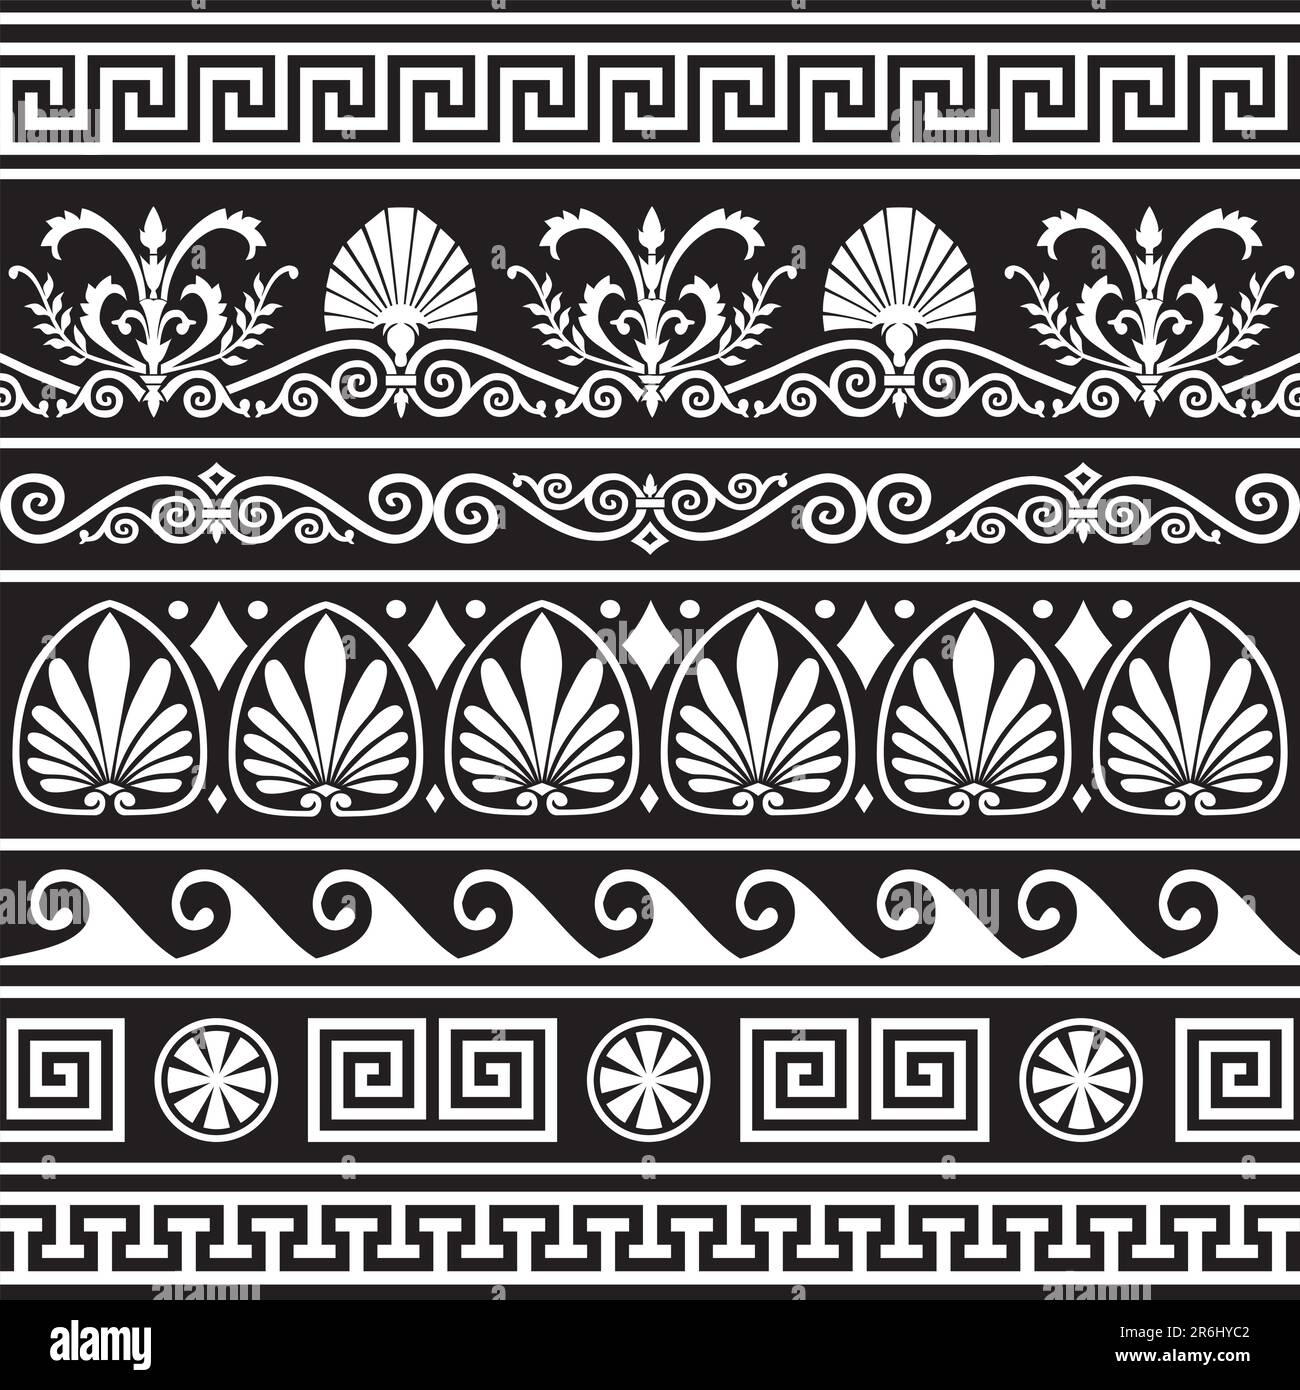 Collection of vector antique greek border ornaments. Elements isolated on black. Full scalable vector graphic, change colors as you like, included ... Stock Vector